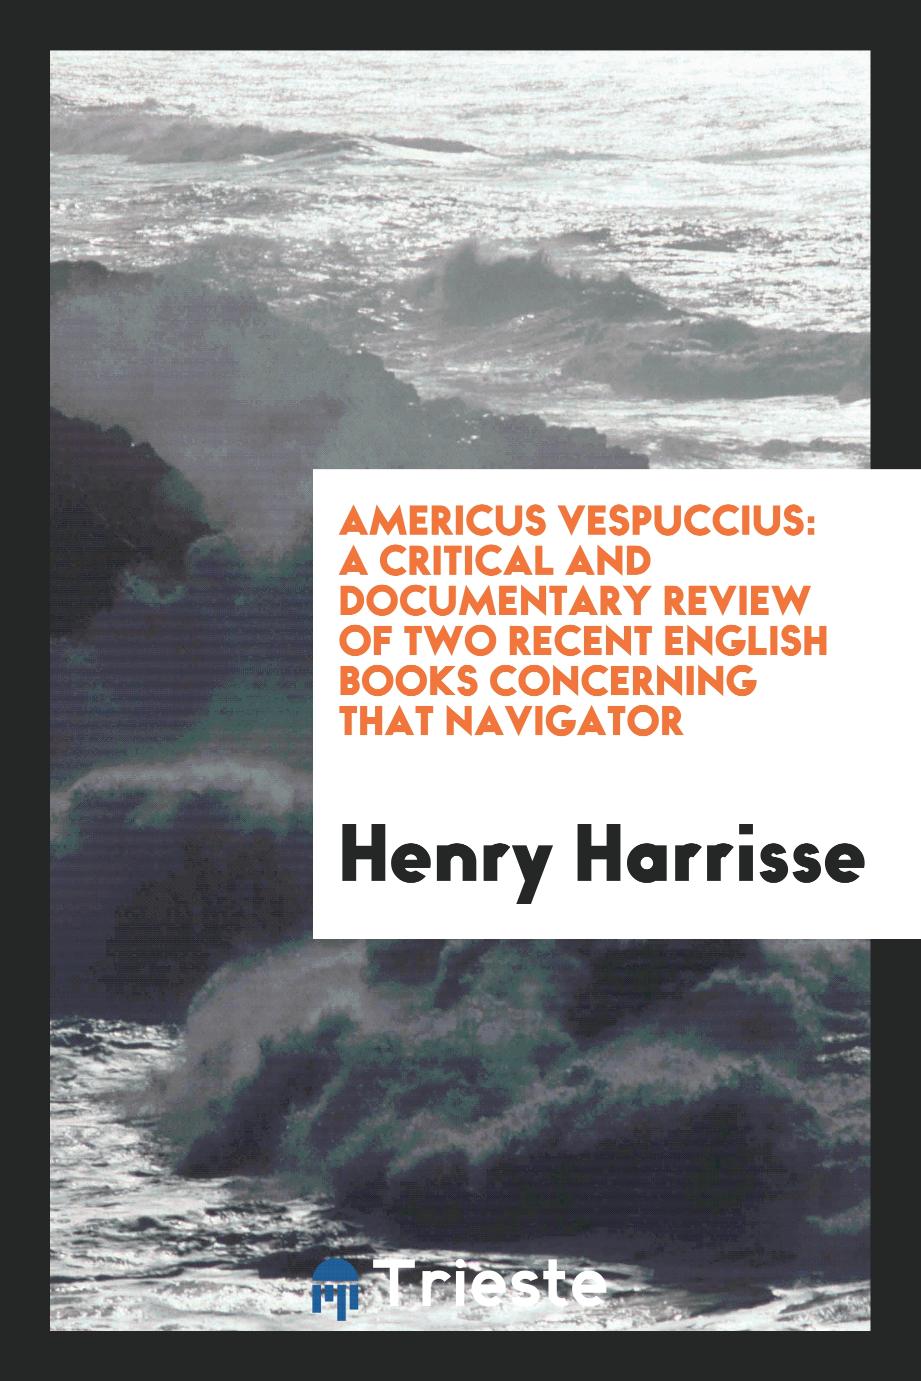 Americus Vespuccius: A Critical and Documentary Review of Two Recent English Books Concerning That Navigator